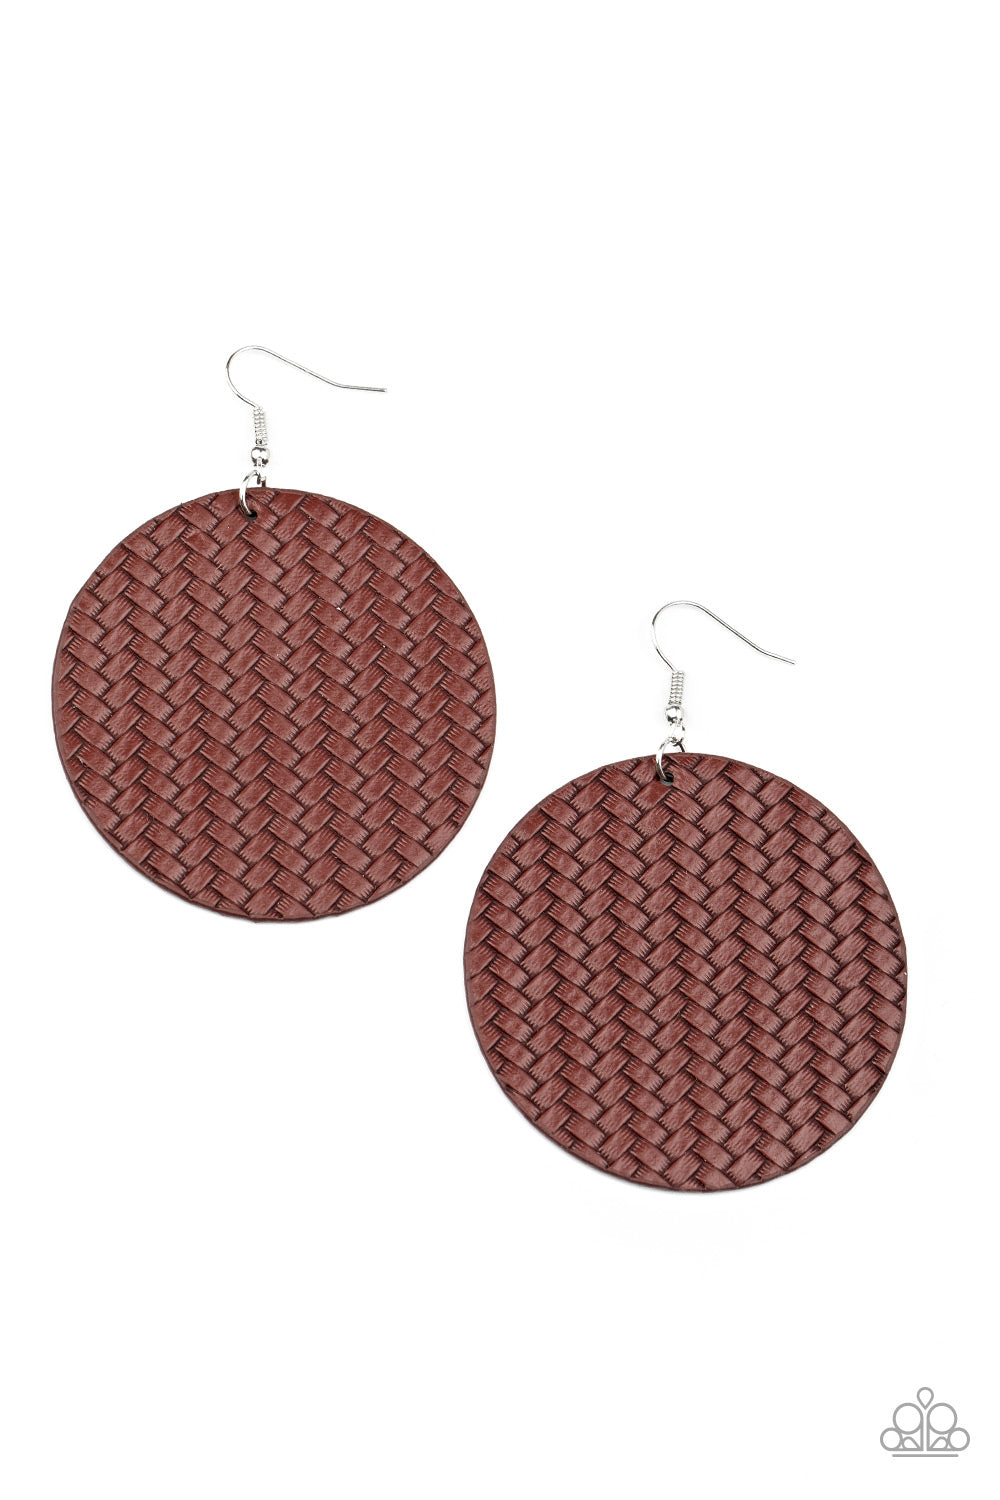 WEAVE Your Mark - Red Earrings